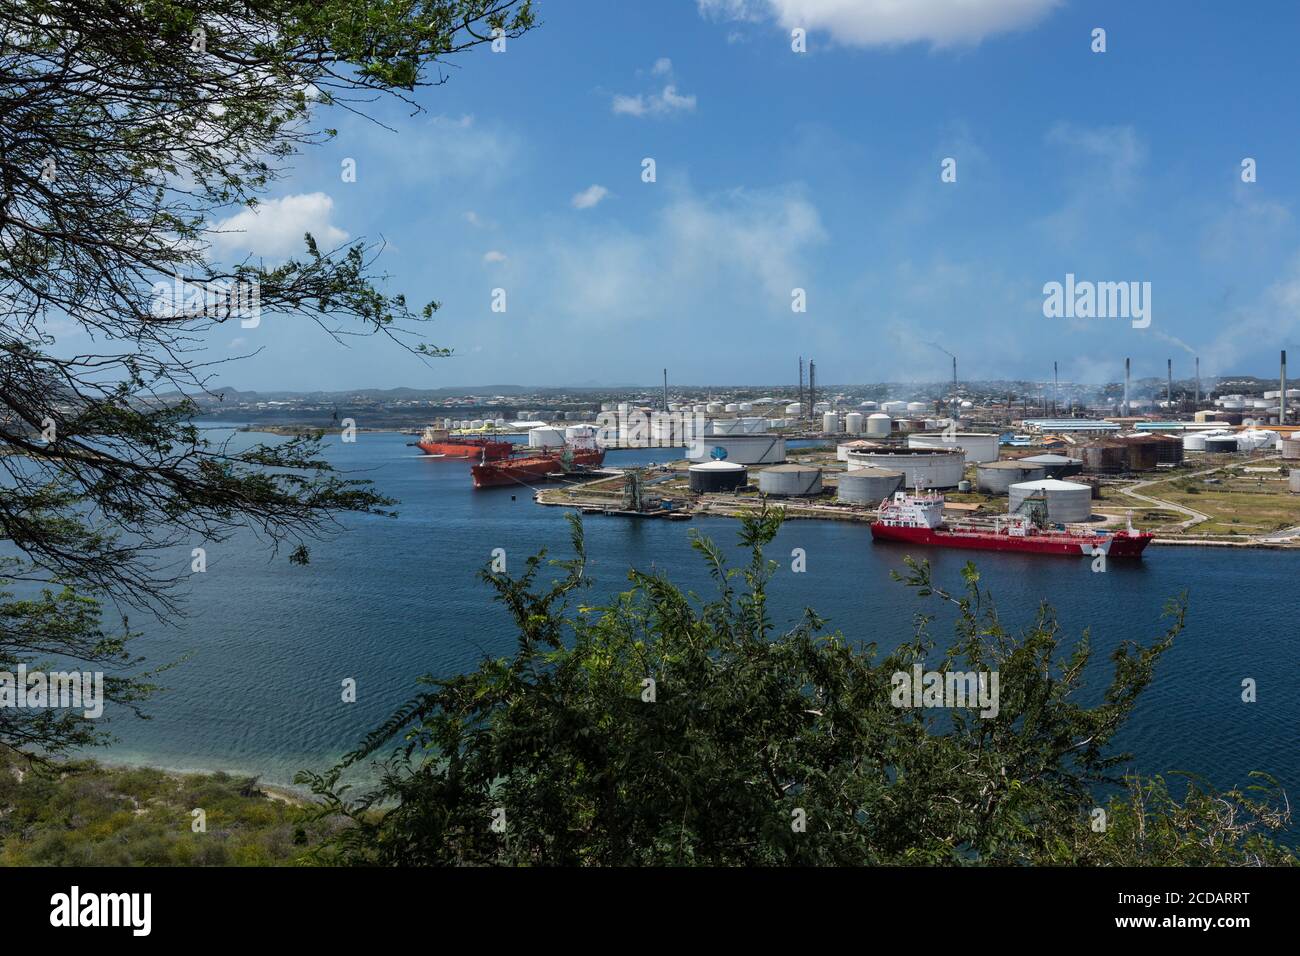 The Isla Oil Refinery in the harbor of Willemstad, capital of the Caribbean island nation of Curacao in the Schottegat lagoon, a large natural lagoon Stock Photo